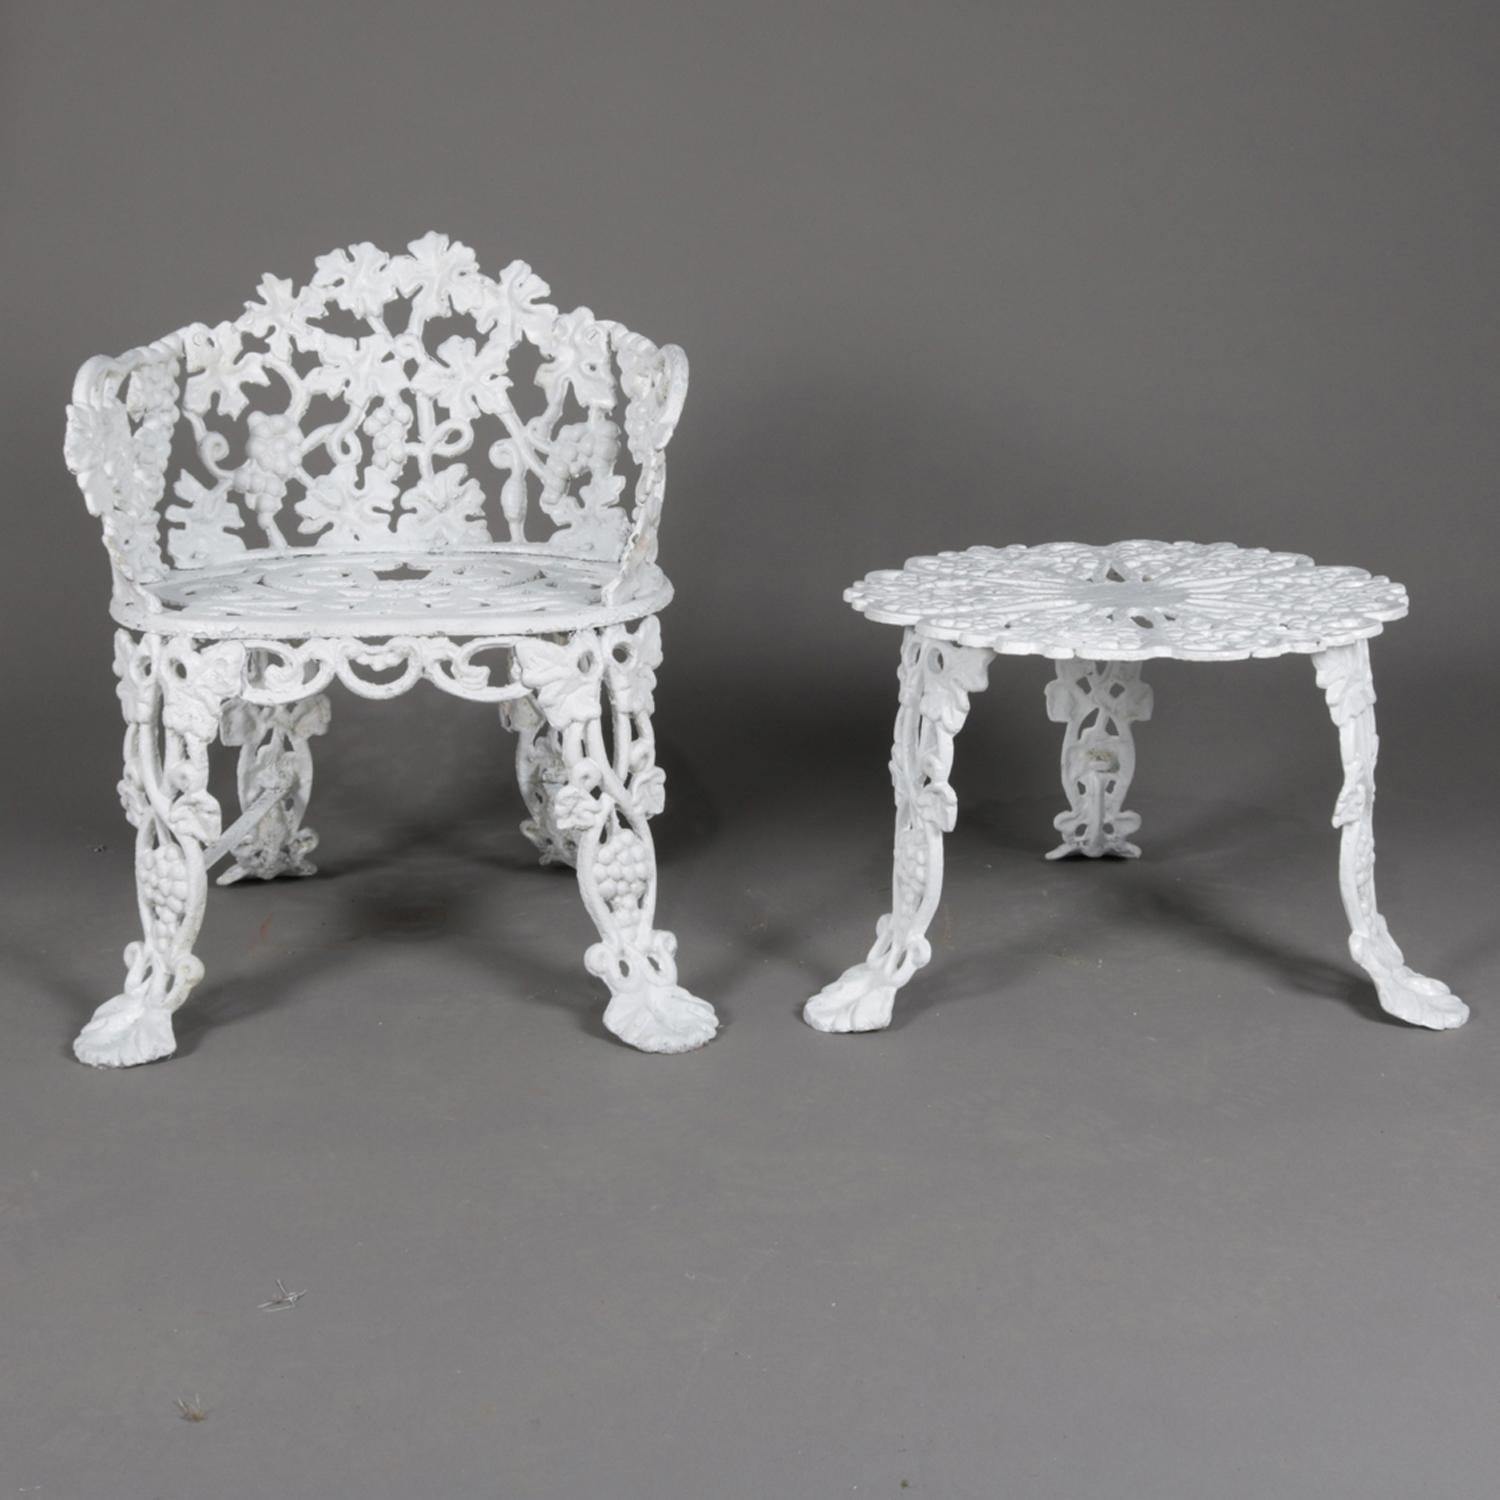 A 2 piece set includes a Victorian reticulated garden bench featuring cast iron construction in grape and leaf pattern and seated on cabriole legs terminating in stylized paw feet with matching garden table, painted white, 20th century

Measures: